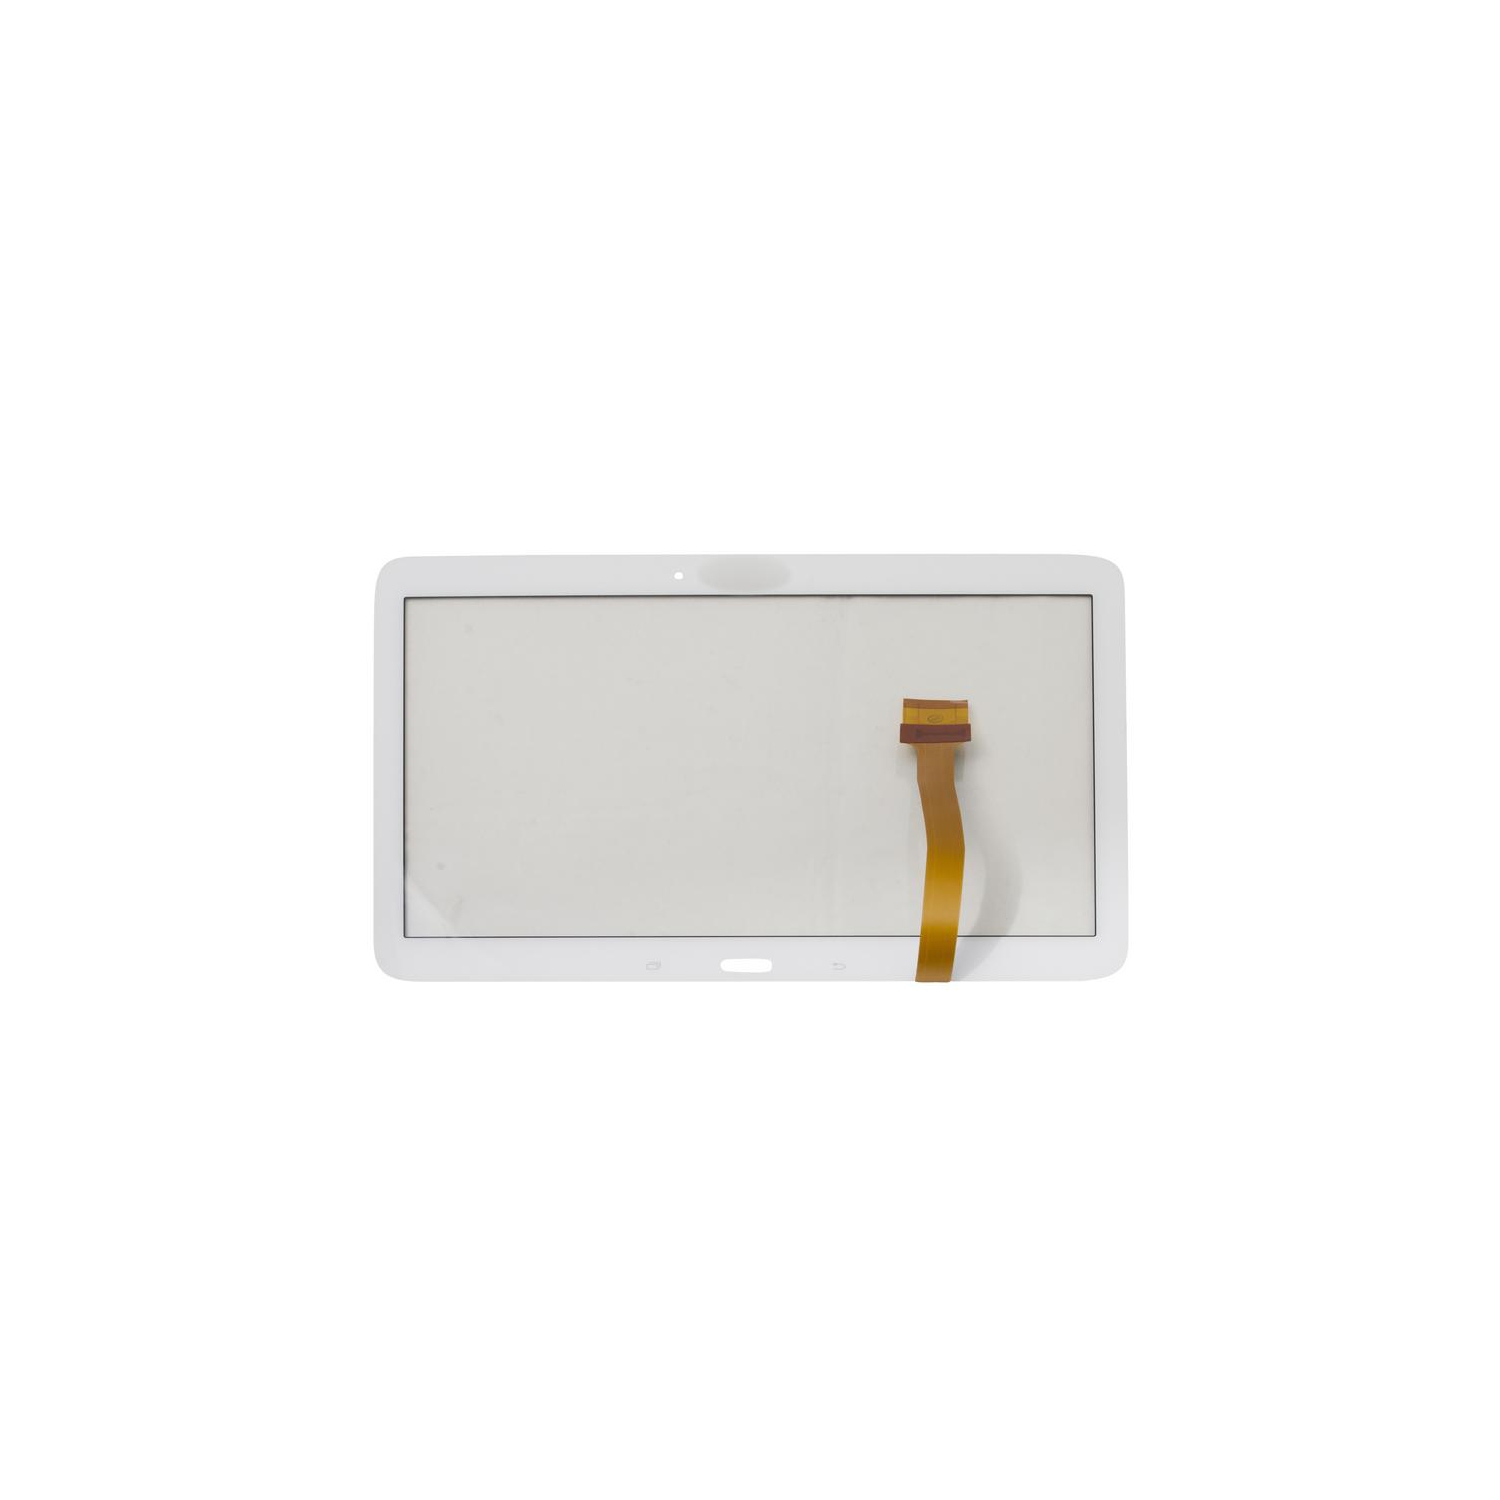 Samsung Galaxy Tab 4 10.1 SM-T530 Digitizer Touch Screen Replacement Part - White